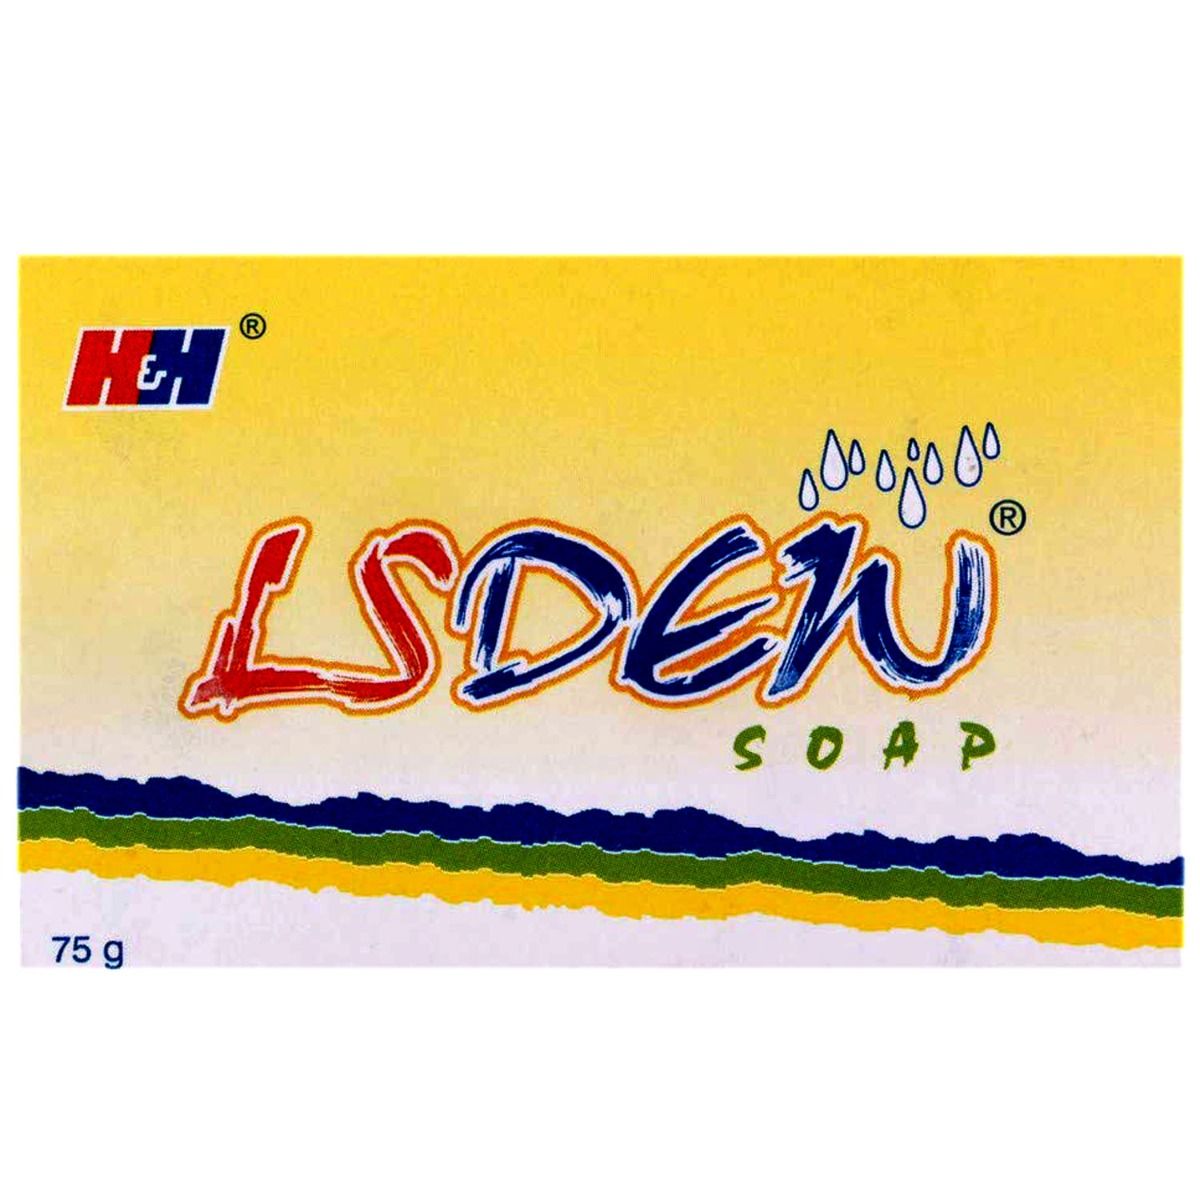 Dermadew Acne Soap 75 gm Price, Uses, Side Effects, Composition Apollo 247